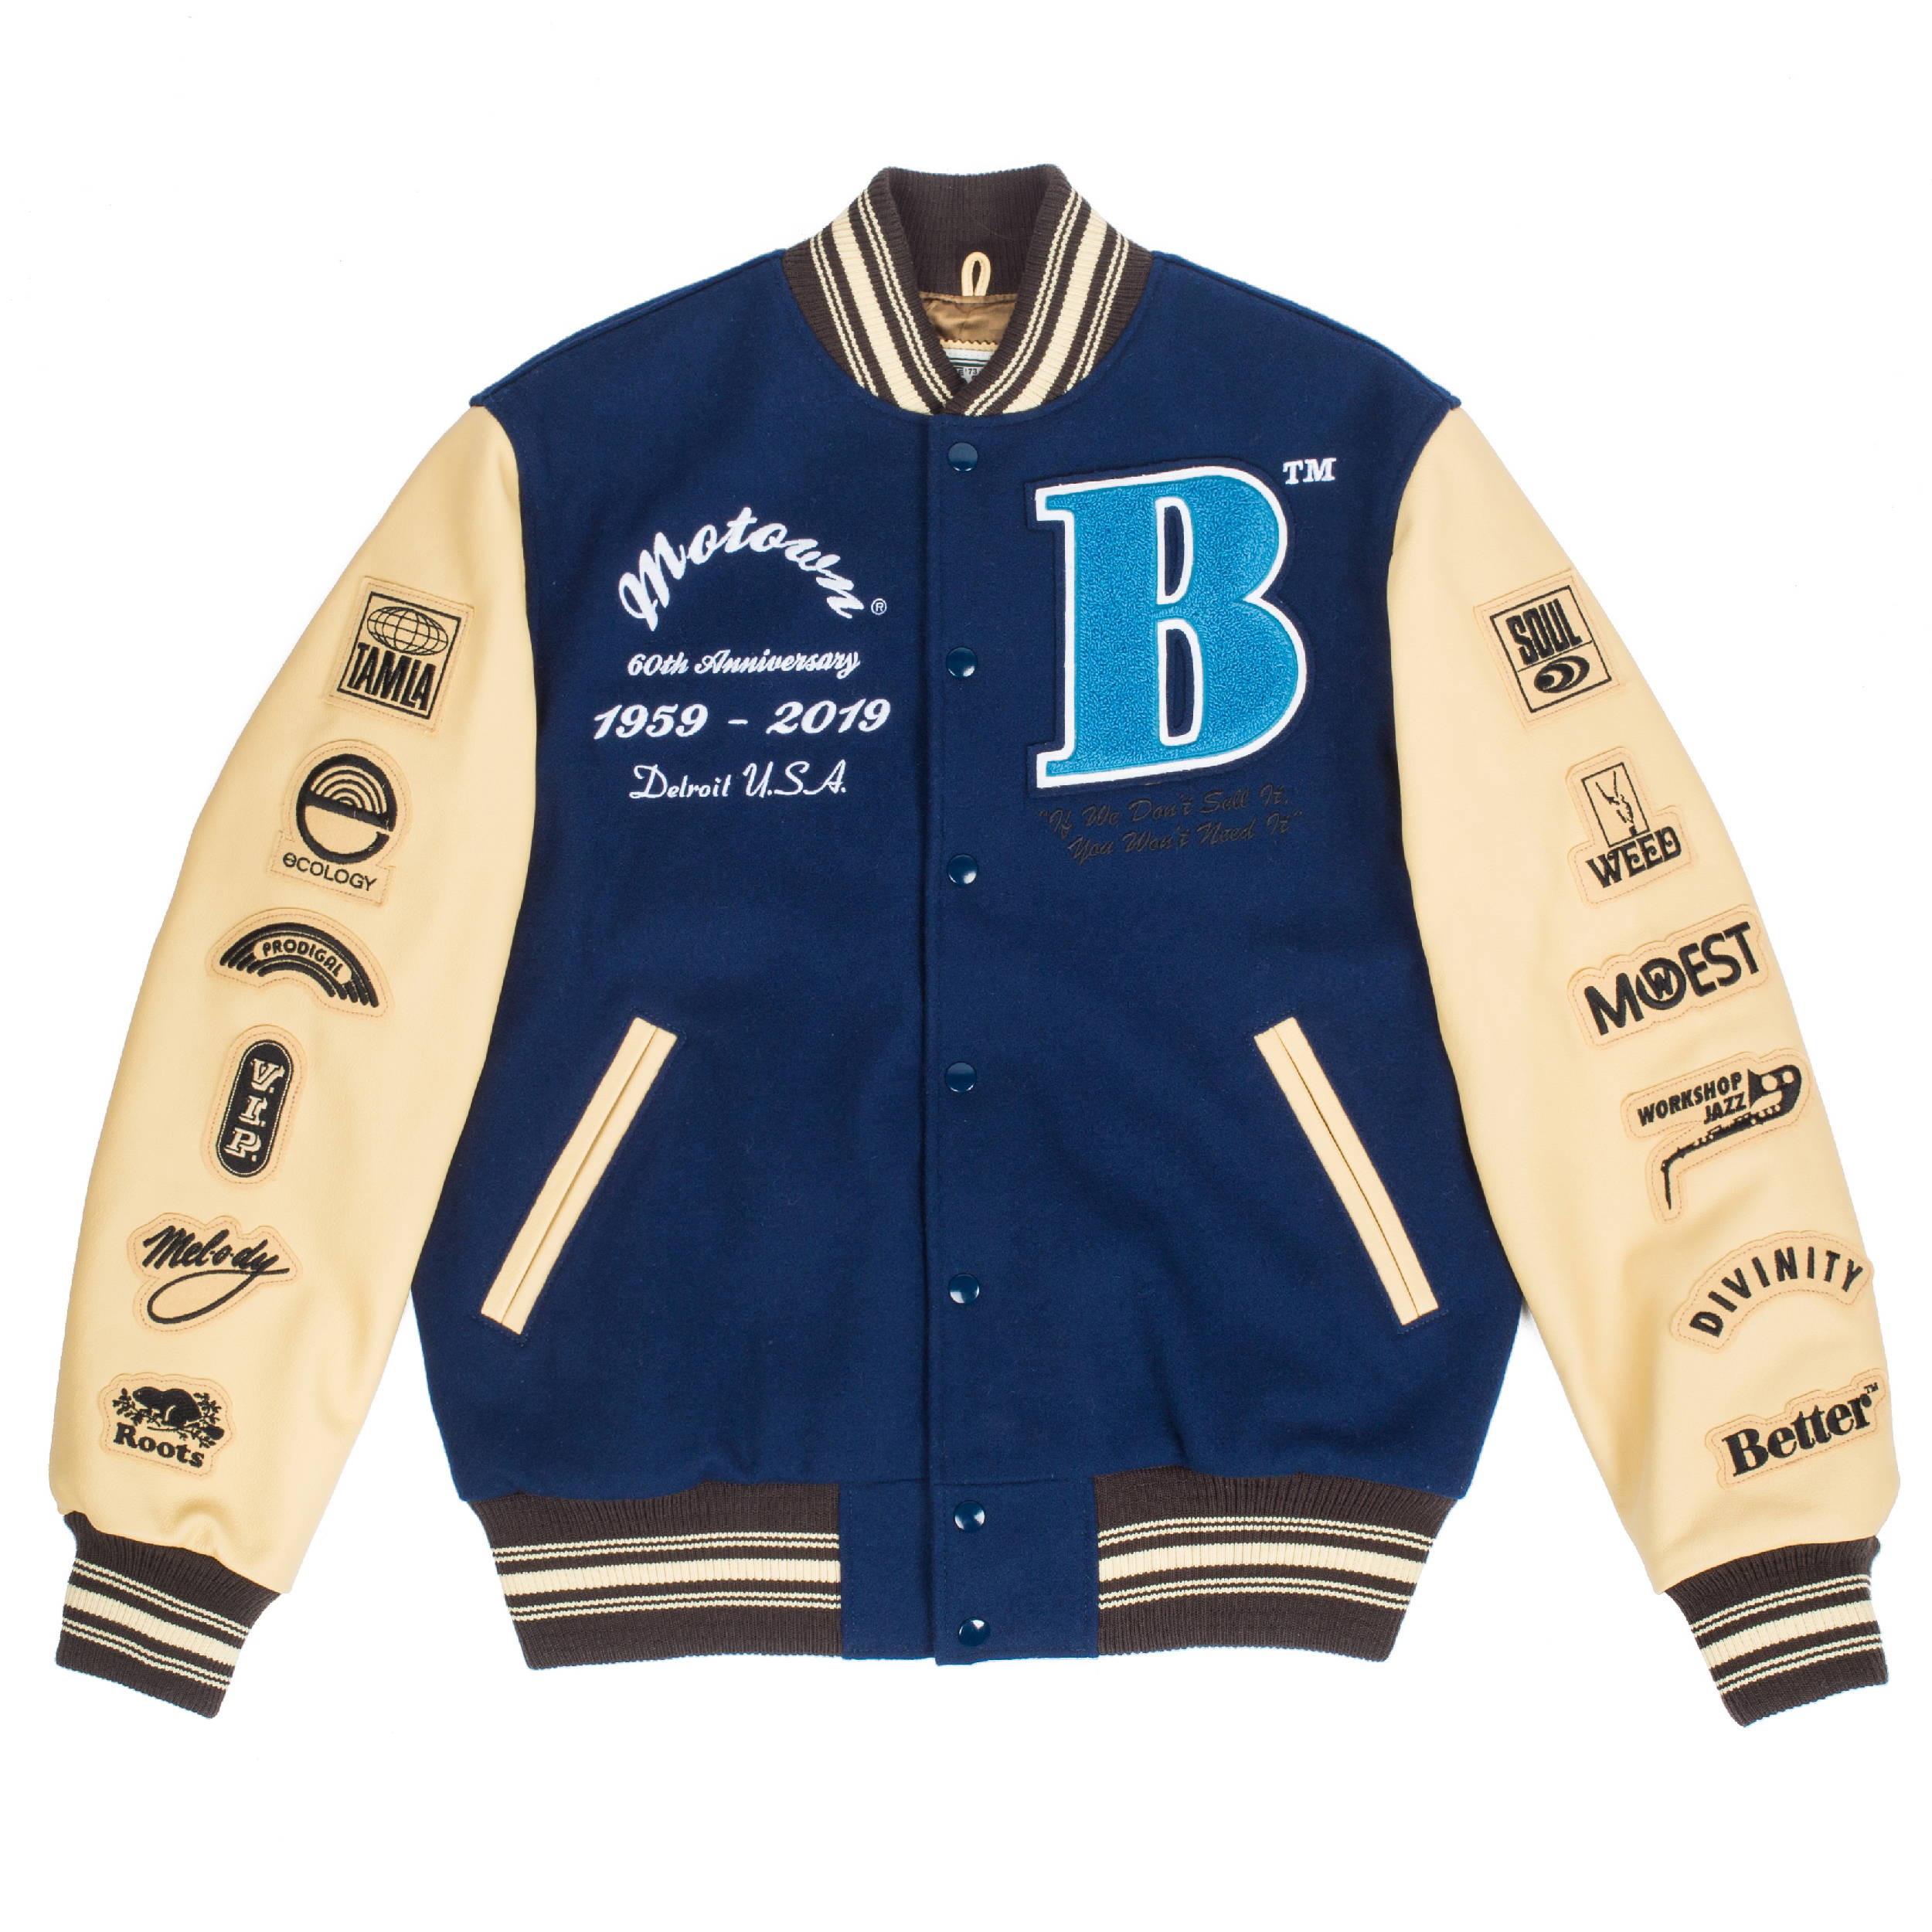 Motown Records celebrate 60th anniversary with limited-edition jacket ...